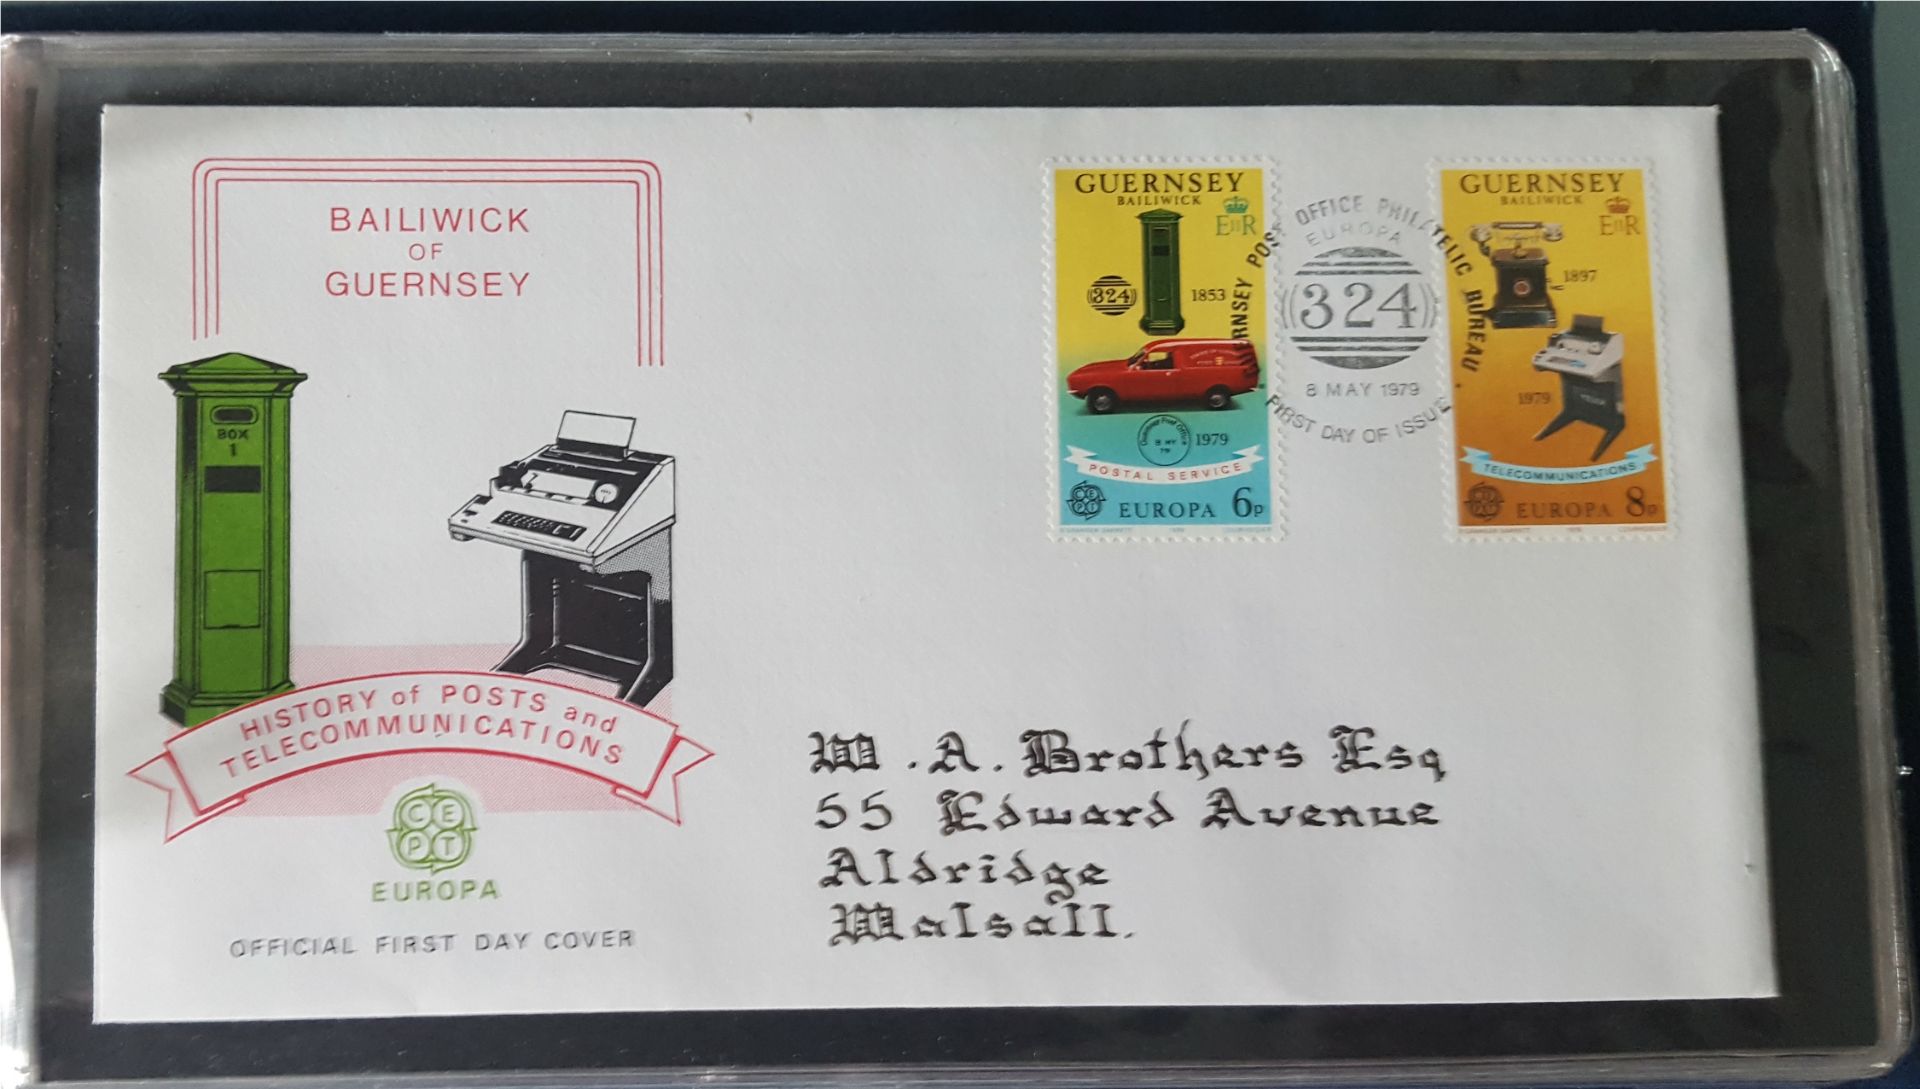 Vintage Retro Collection of First Day Covers Bailiwick of Guernsey 10 FDC's In Folder c1970's - Bild 4 aus 5